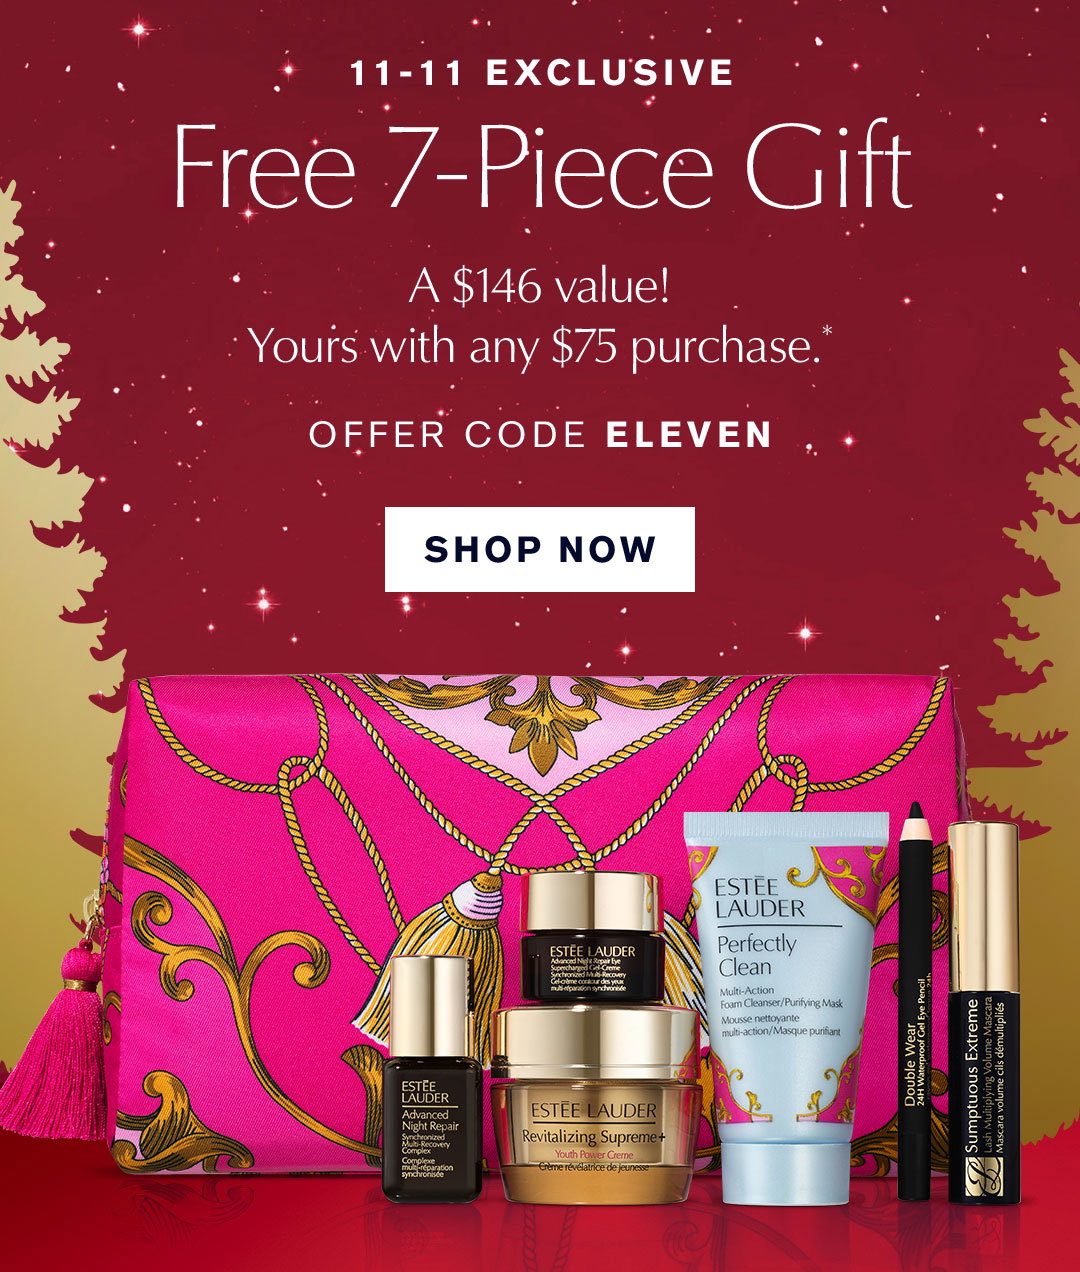 Estée Lauder free gift: Get a seven-piece set from the brand free of charge